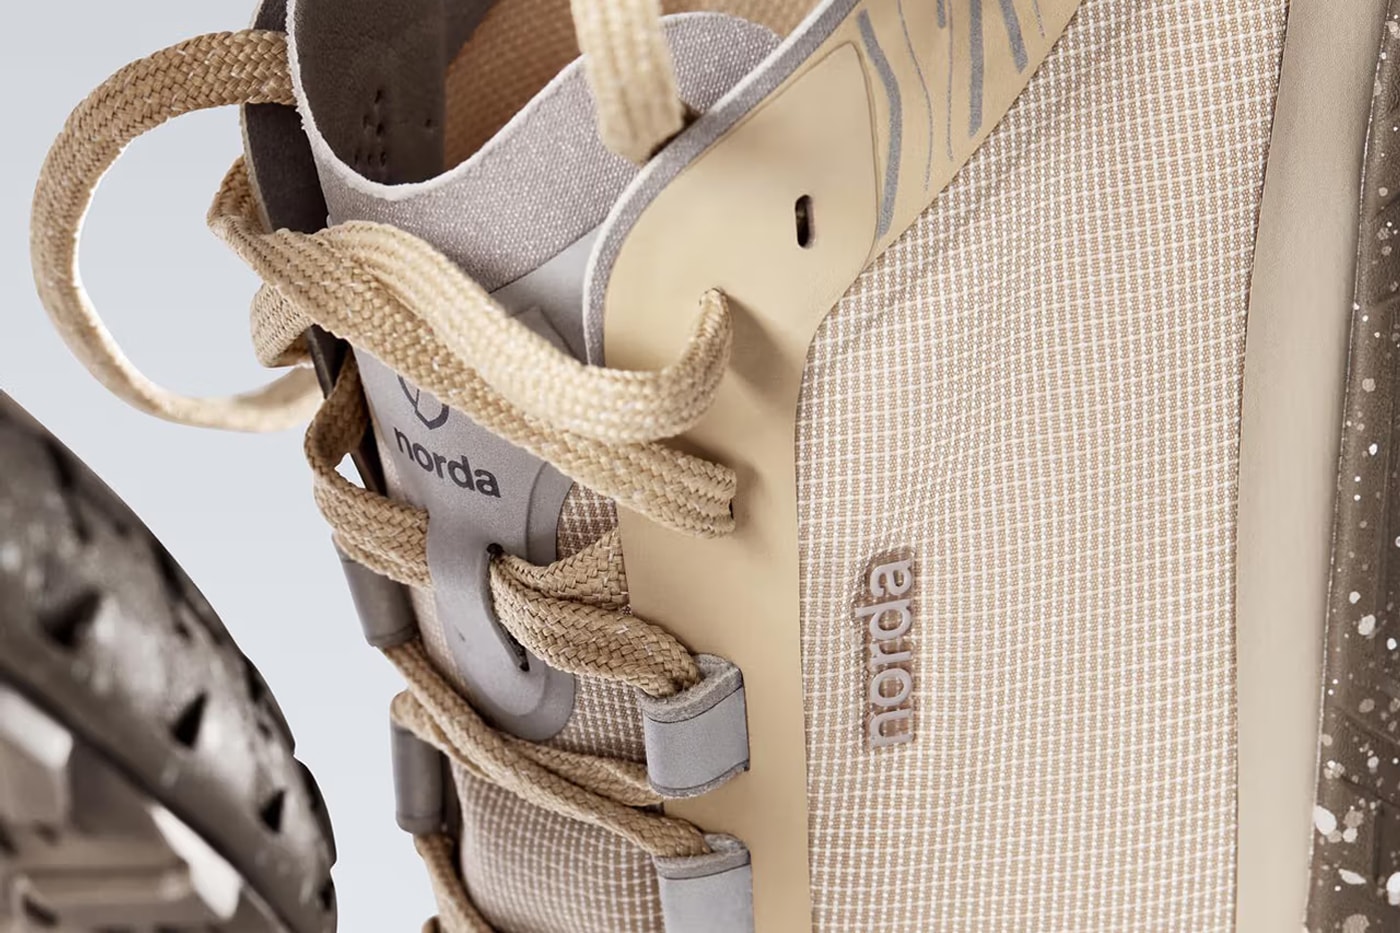 norda 001 trail running shoes regolith mars vibram dyneema fw23 official release date info photos price store list buying guide